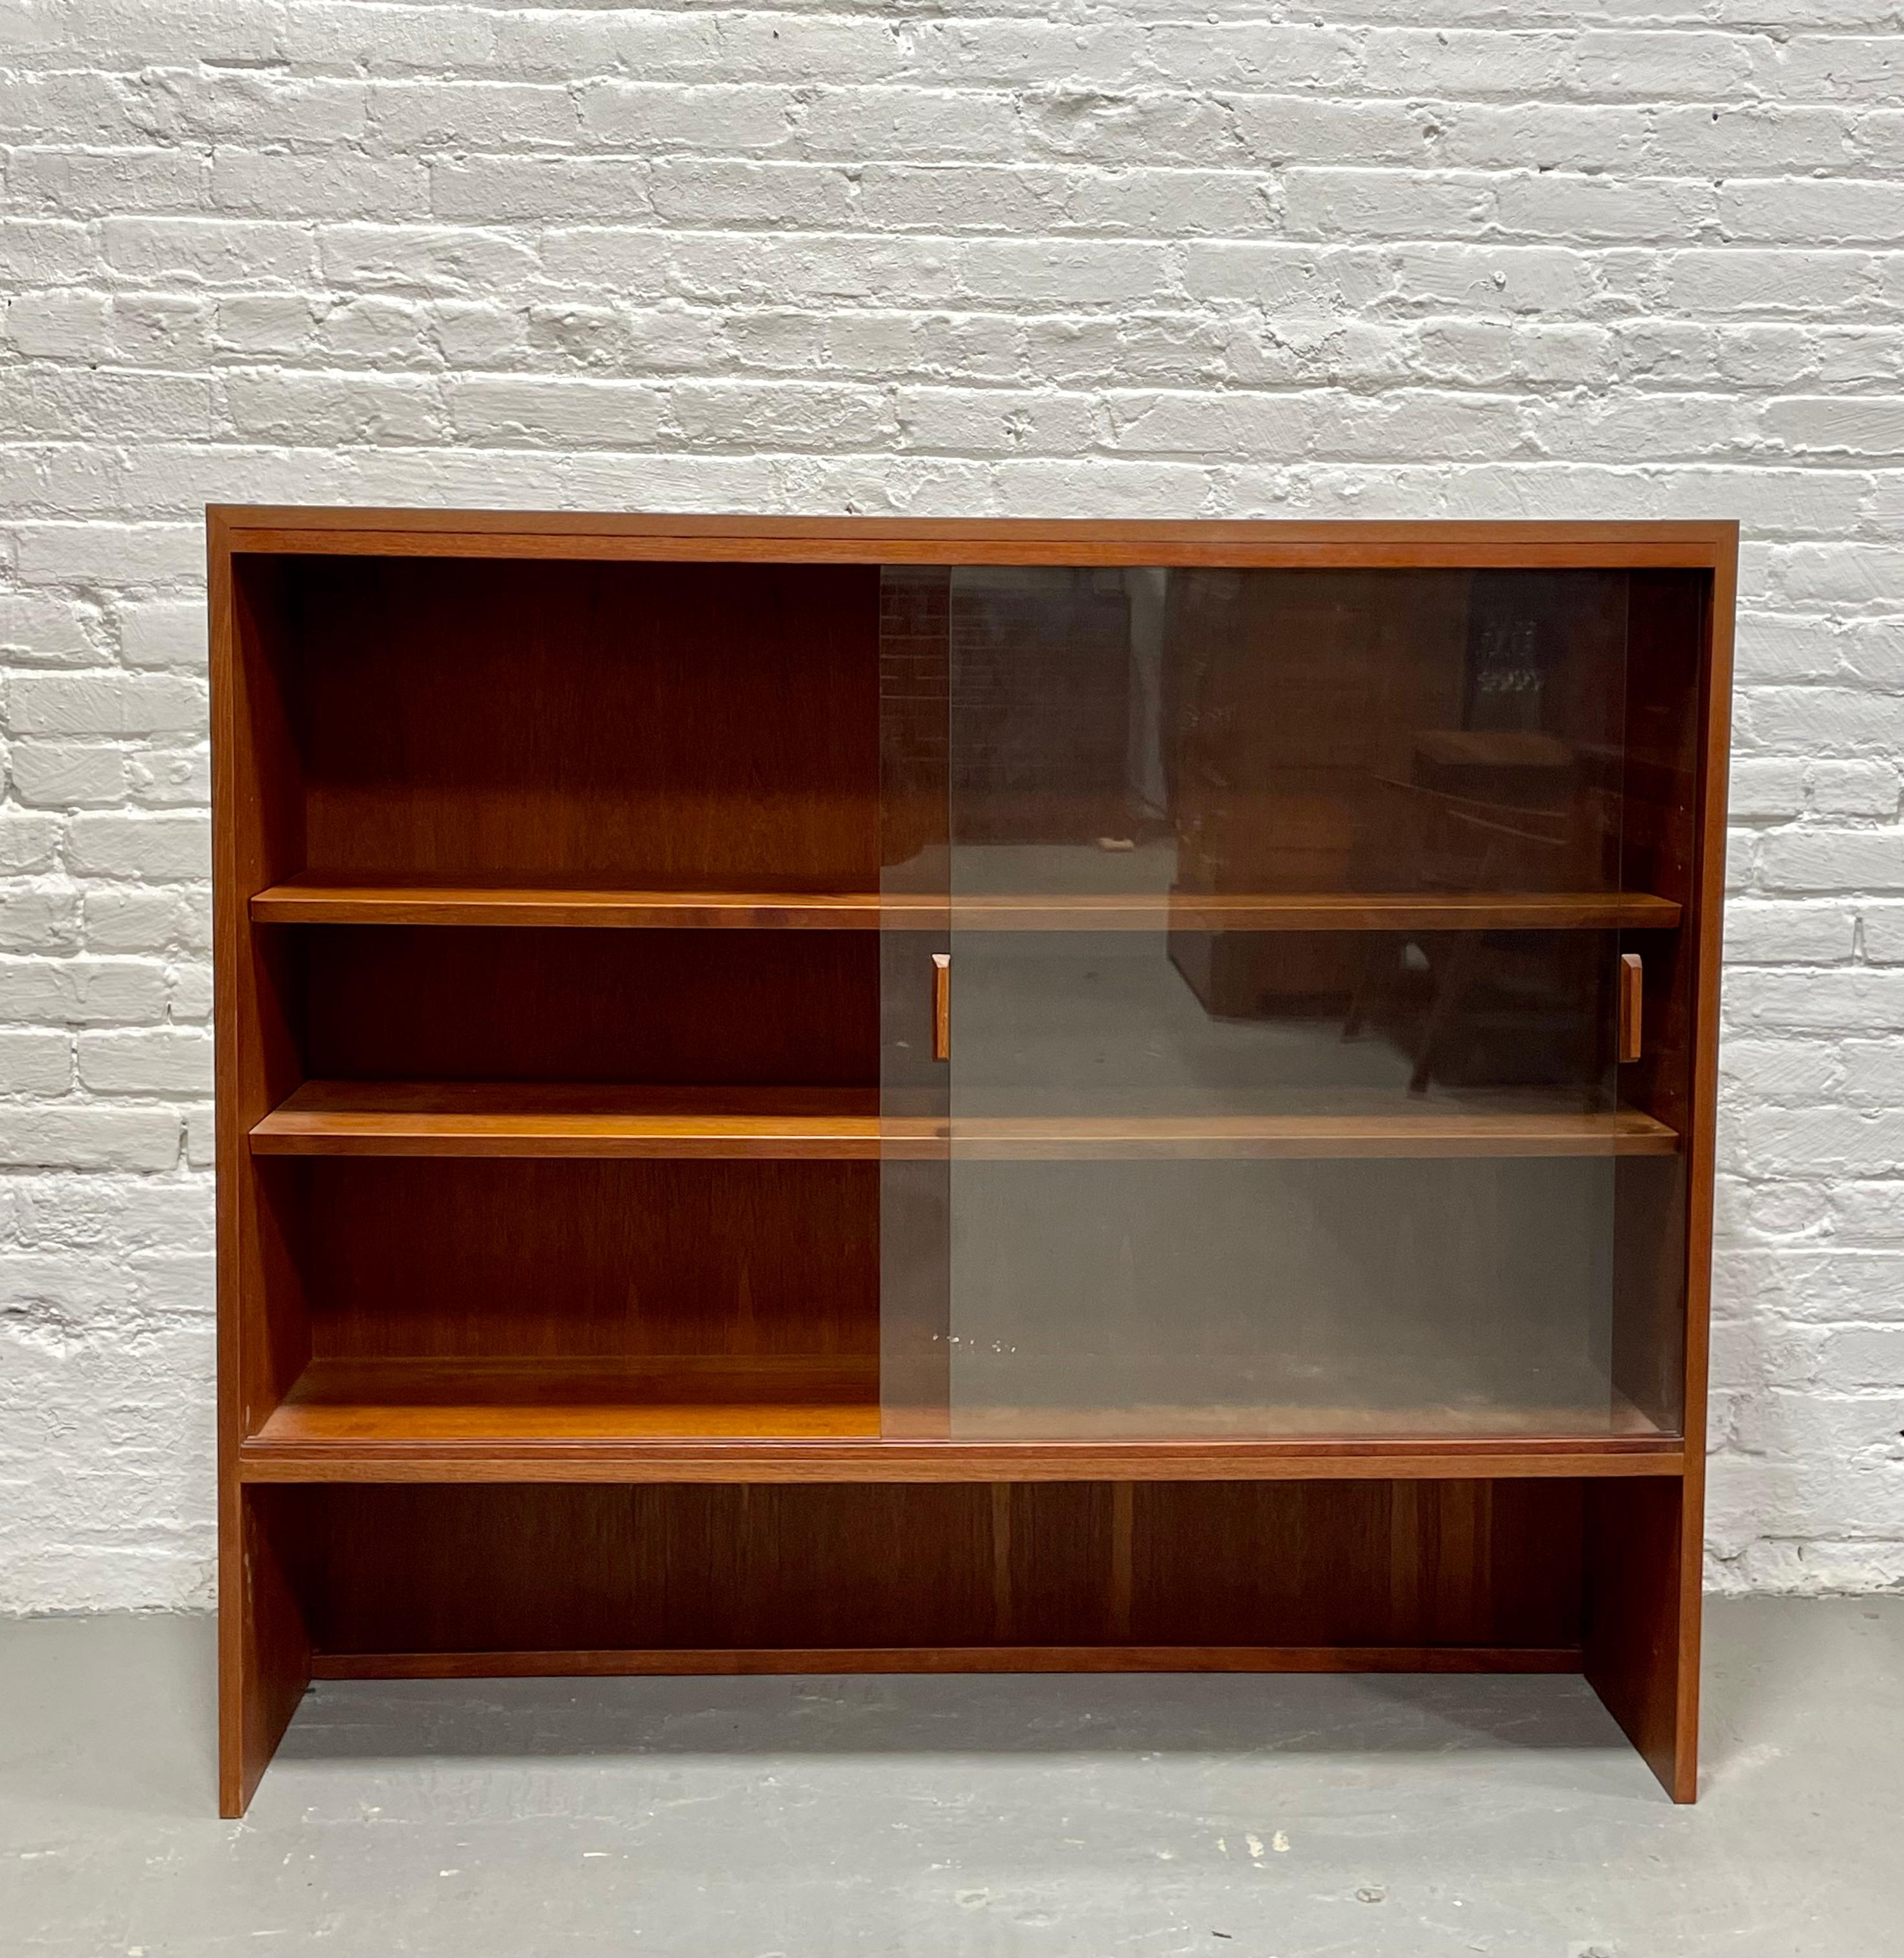 Mid-Century Modern Teak Danish bookcase / hutch, circa 1960s. Plenty of room for books or displaying your collection. This narrow piece makes it a great choice for a hallway or long wall space. The glass doors keep the dust out and there is a lovely